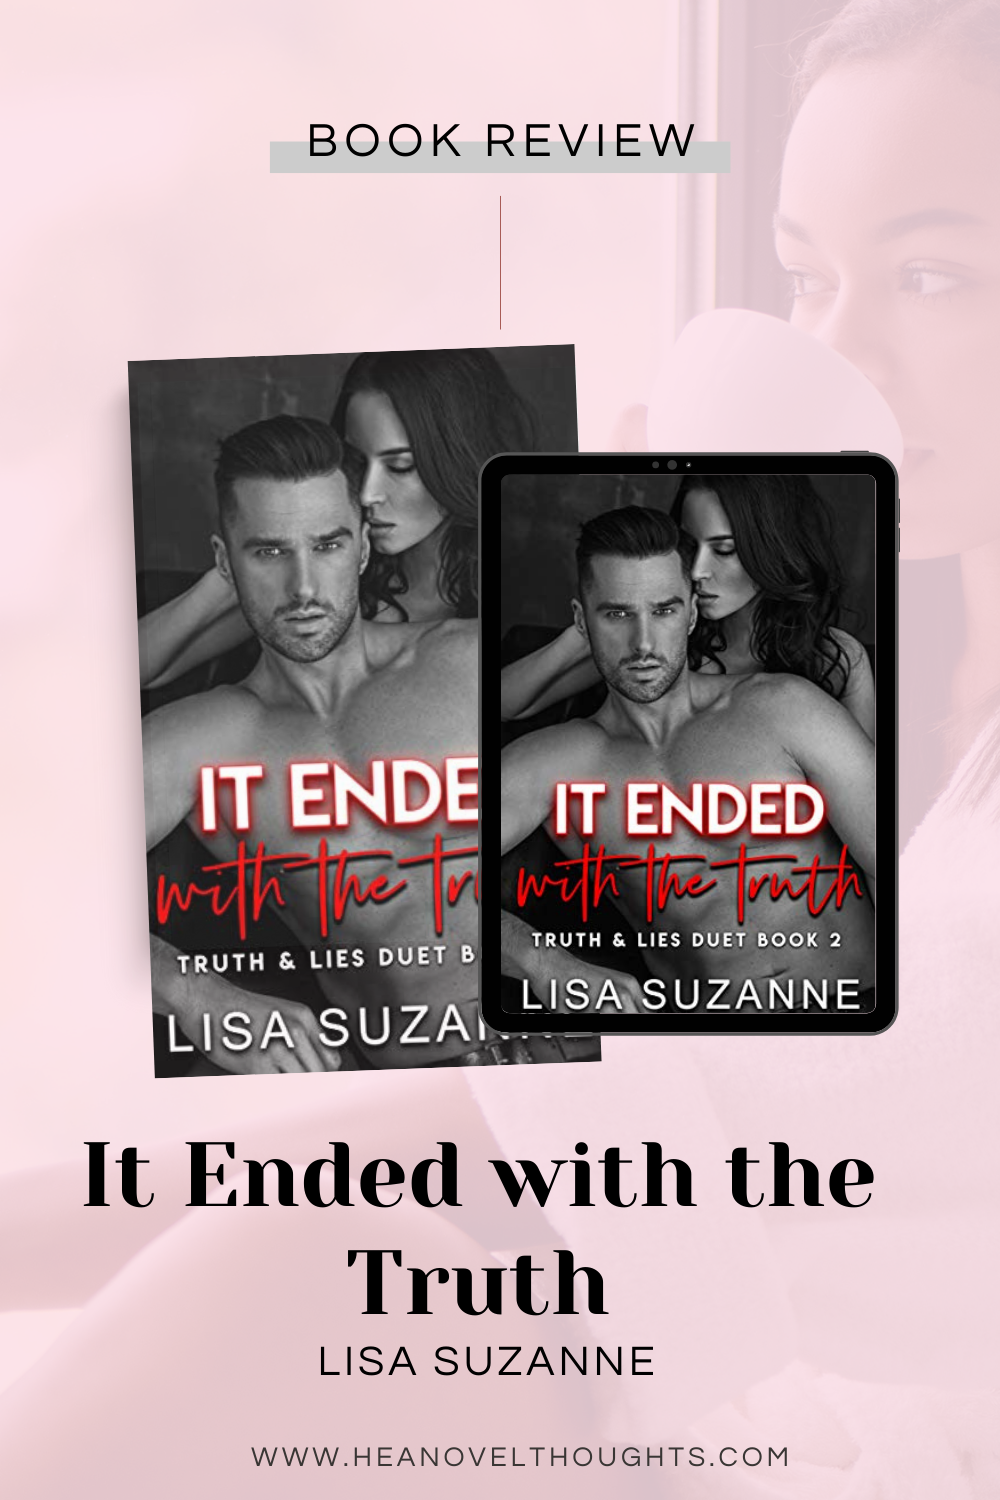 It Ended with the Truth by Lisa Suzanne